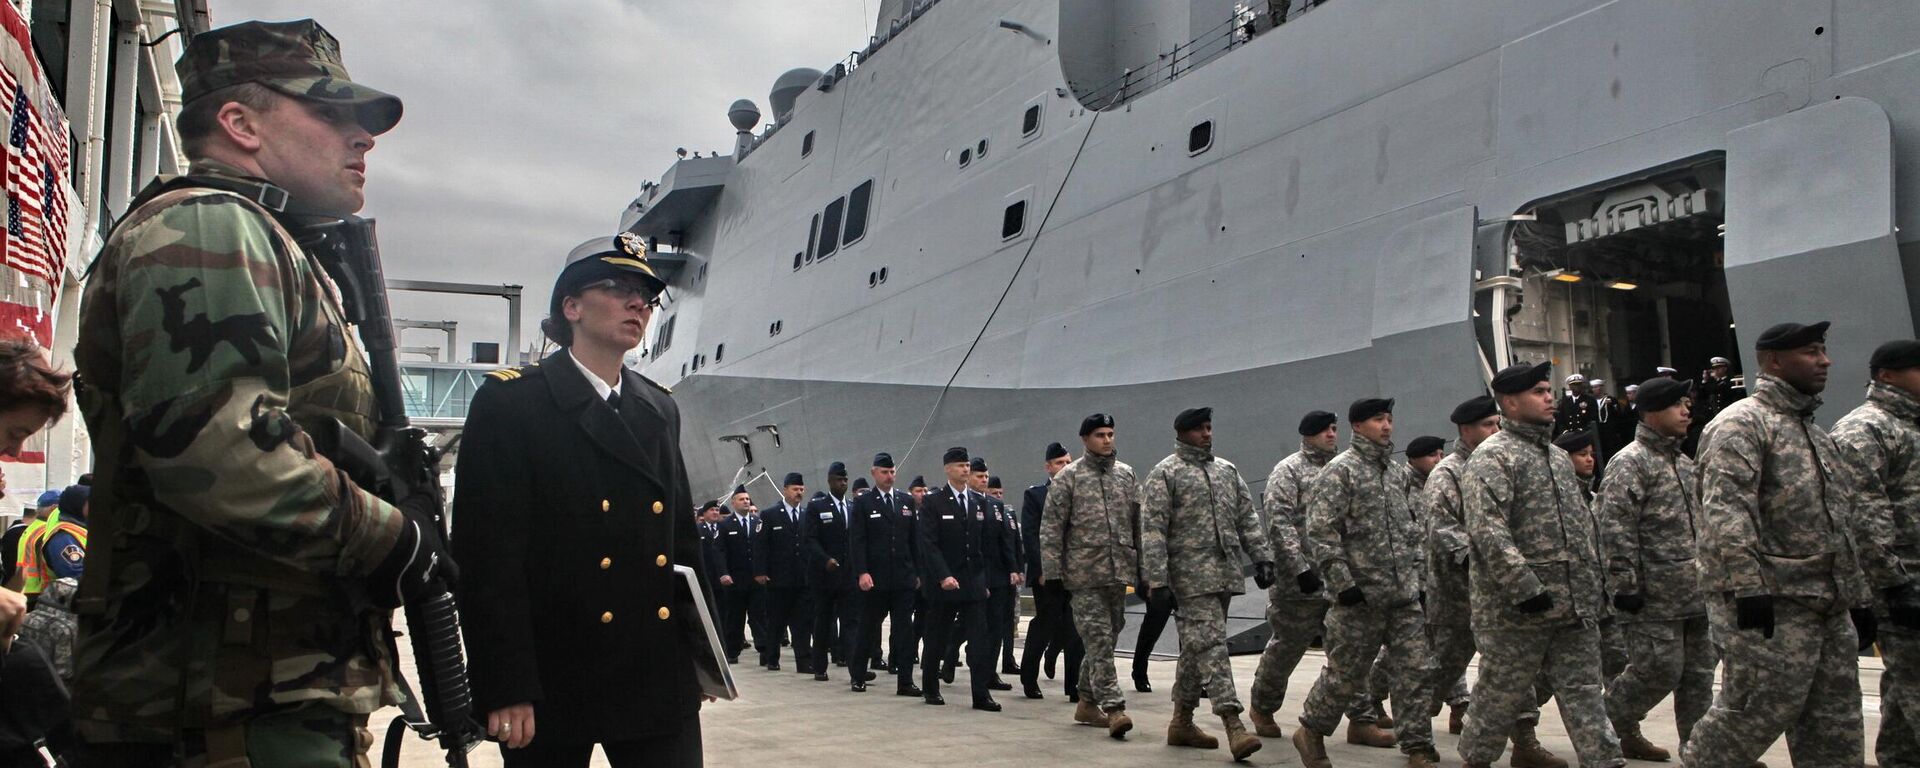 Troops parade during a ceremony for the new Navy assault ship USS New York, built with World Trade Center steel, marking its arrival in New York, Monday Nov. 2, 2009 - Sputnik International, 1920, 16.03.2024